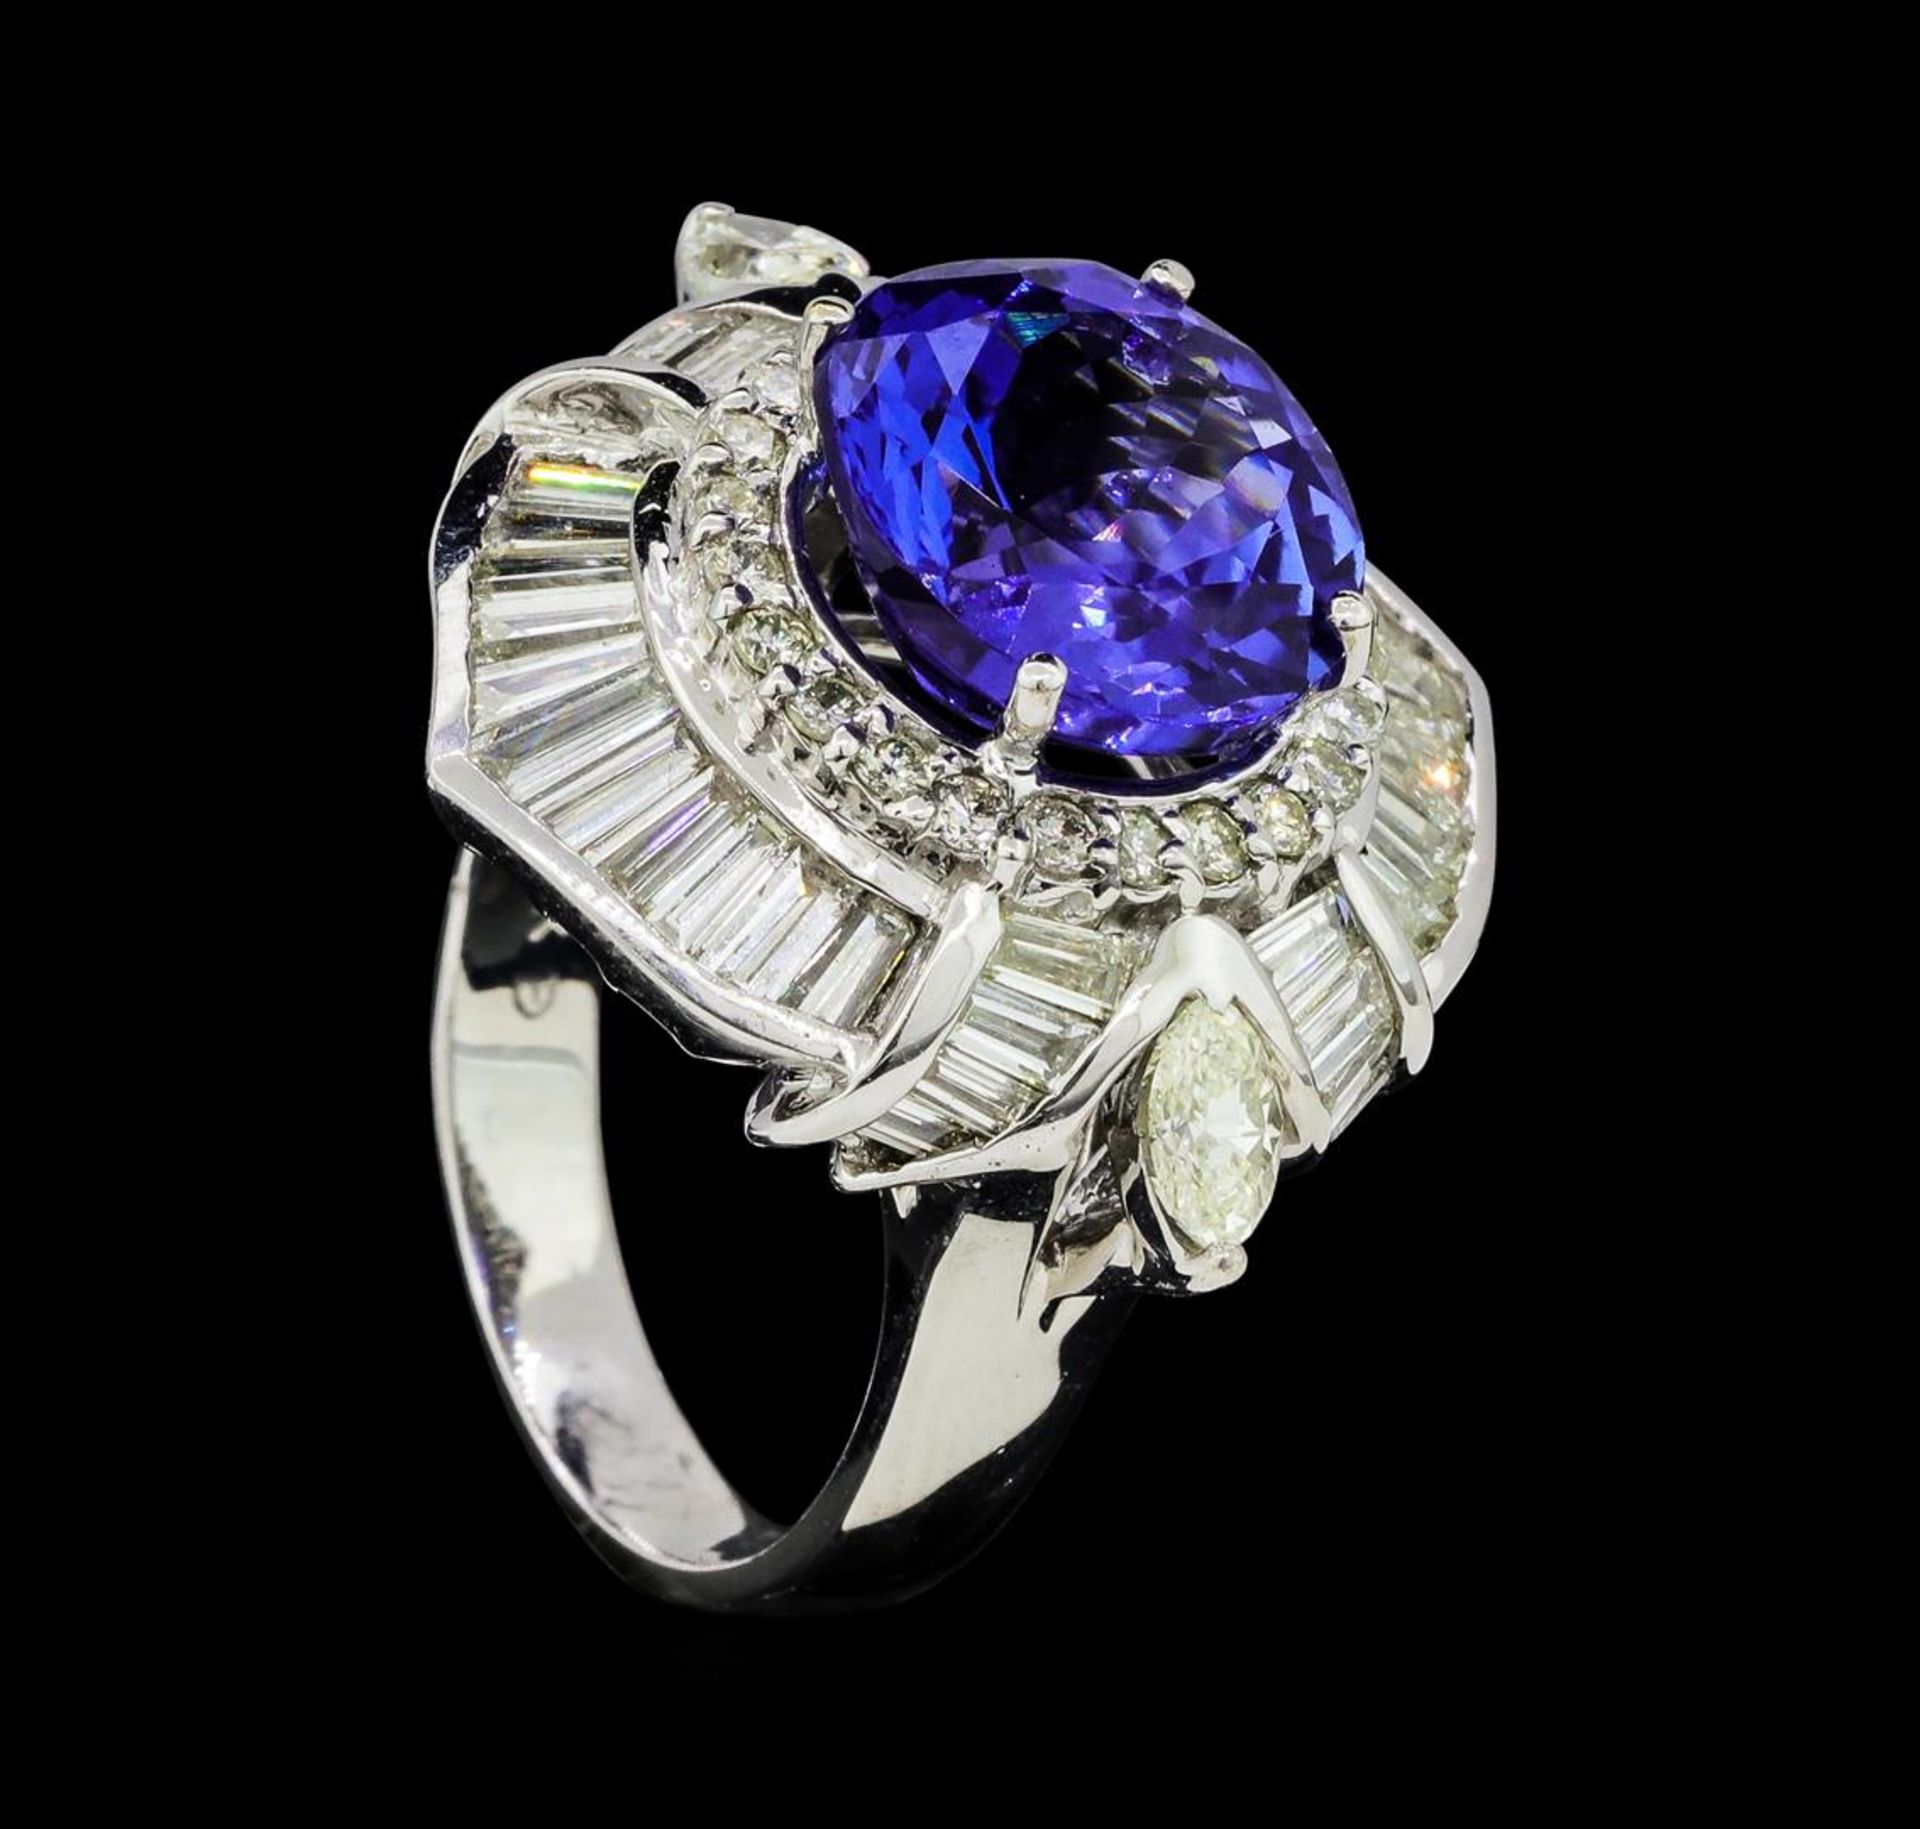 9.95 ctw Round Brilliant Tanzanite And Marquise Shaped Cut Diamond Ring - 18KT W - Image 4 of 6